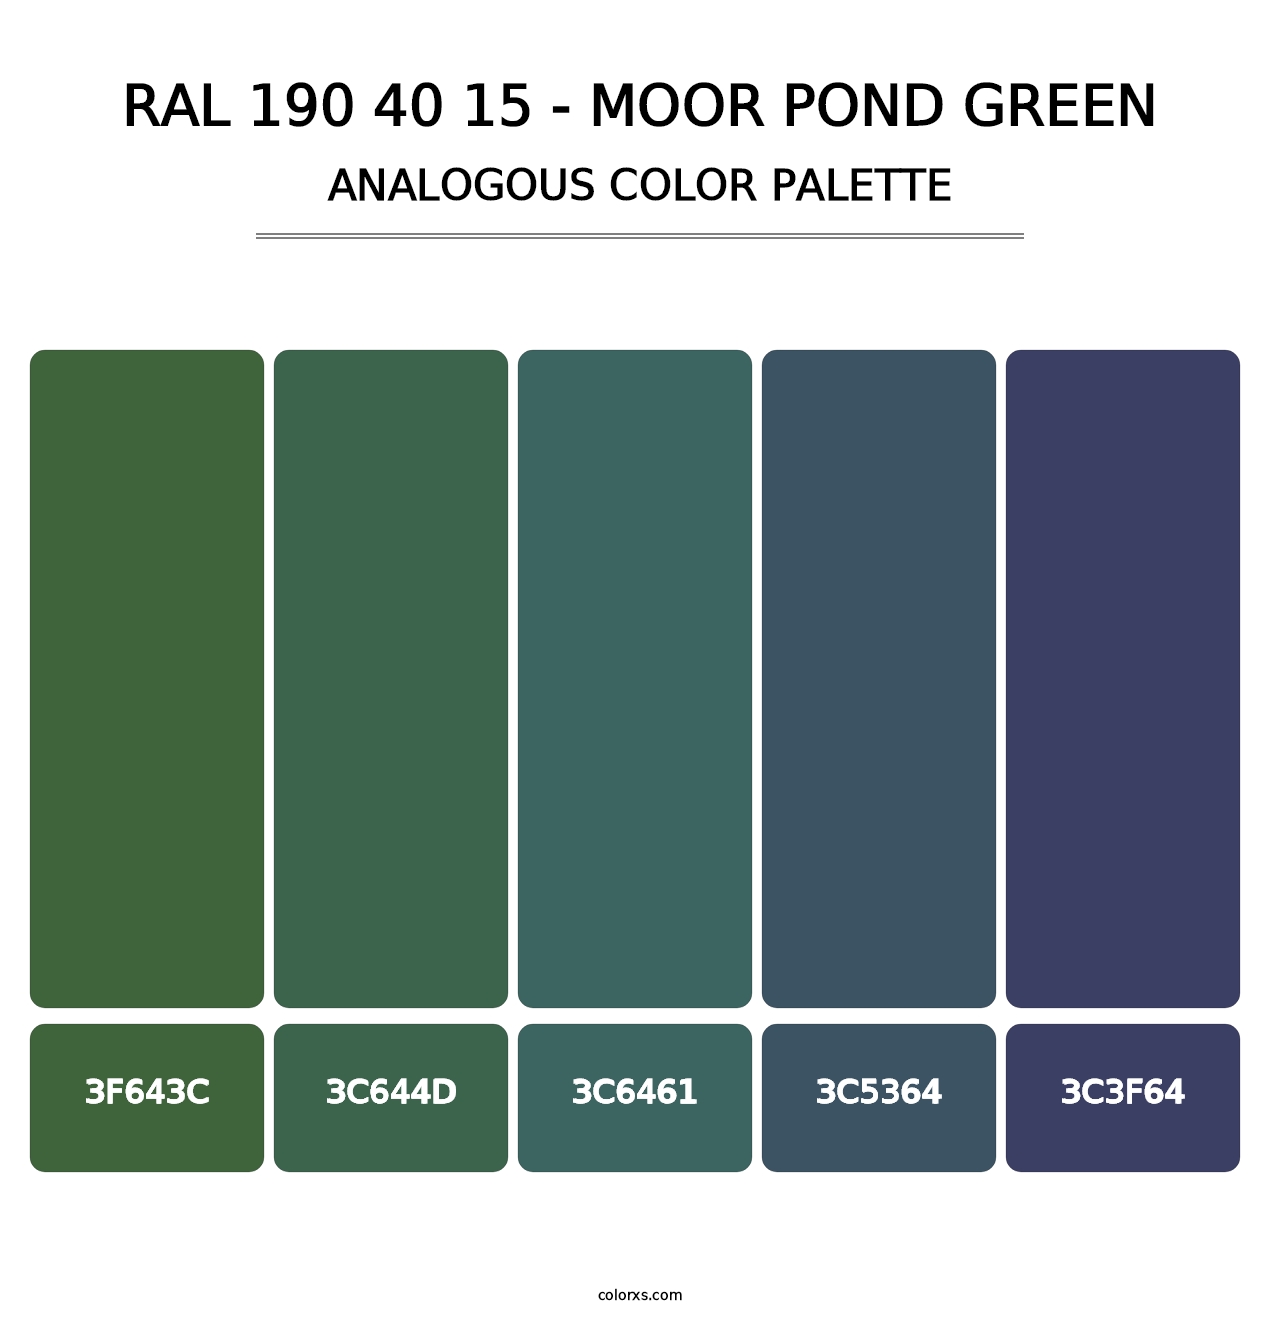 RAL 190 40 15 - Moor Pond Green - Analogous Color Palette